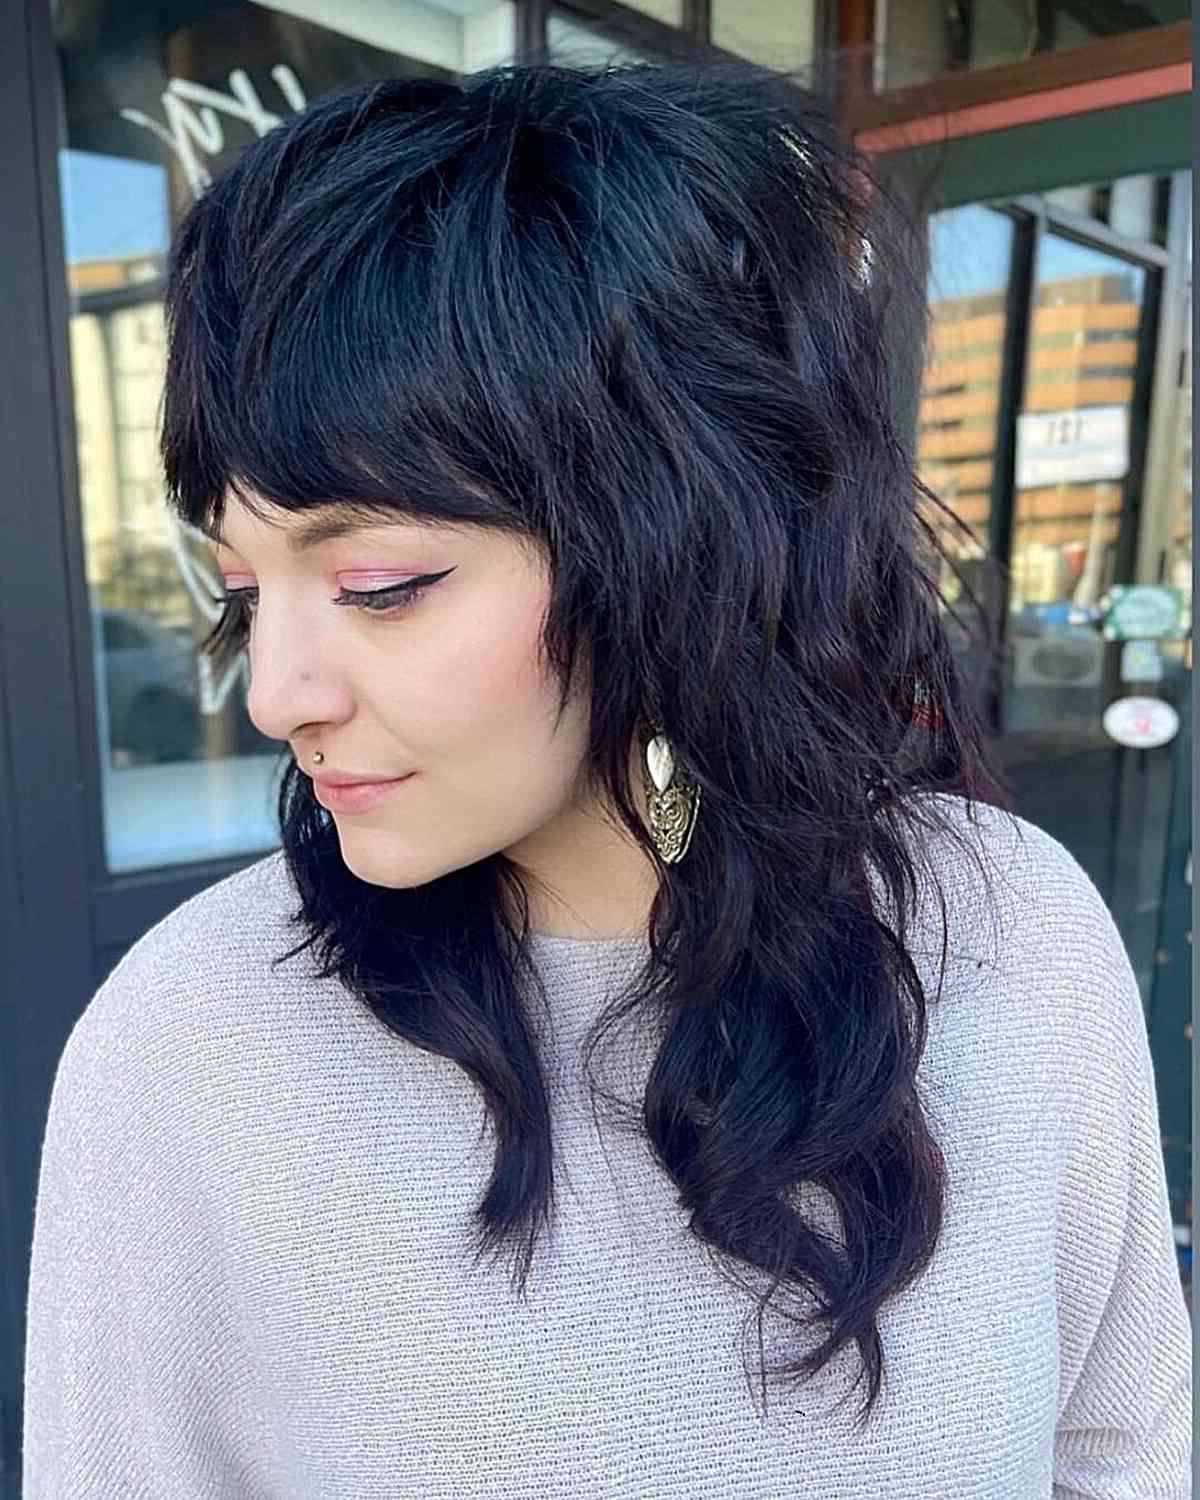 90 Chic Medium Shag Haircuts With Bangs For An On Trend Style Regarding Current Medium Shaggy Black Hair With Bangs (Photo 3 of 18)